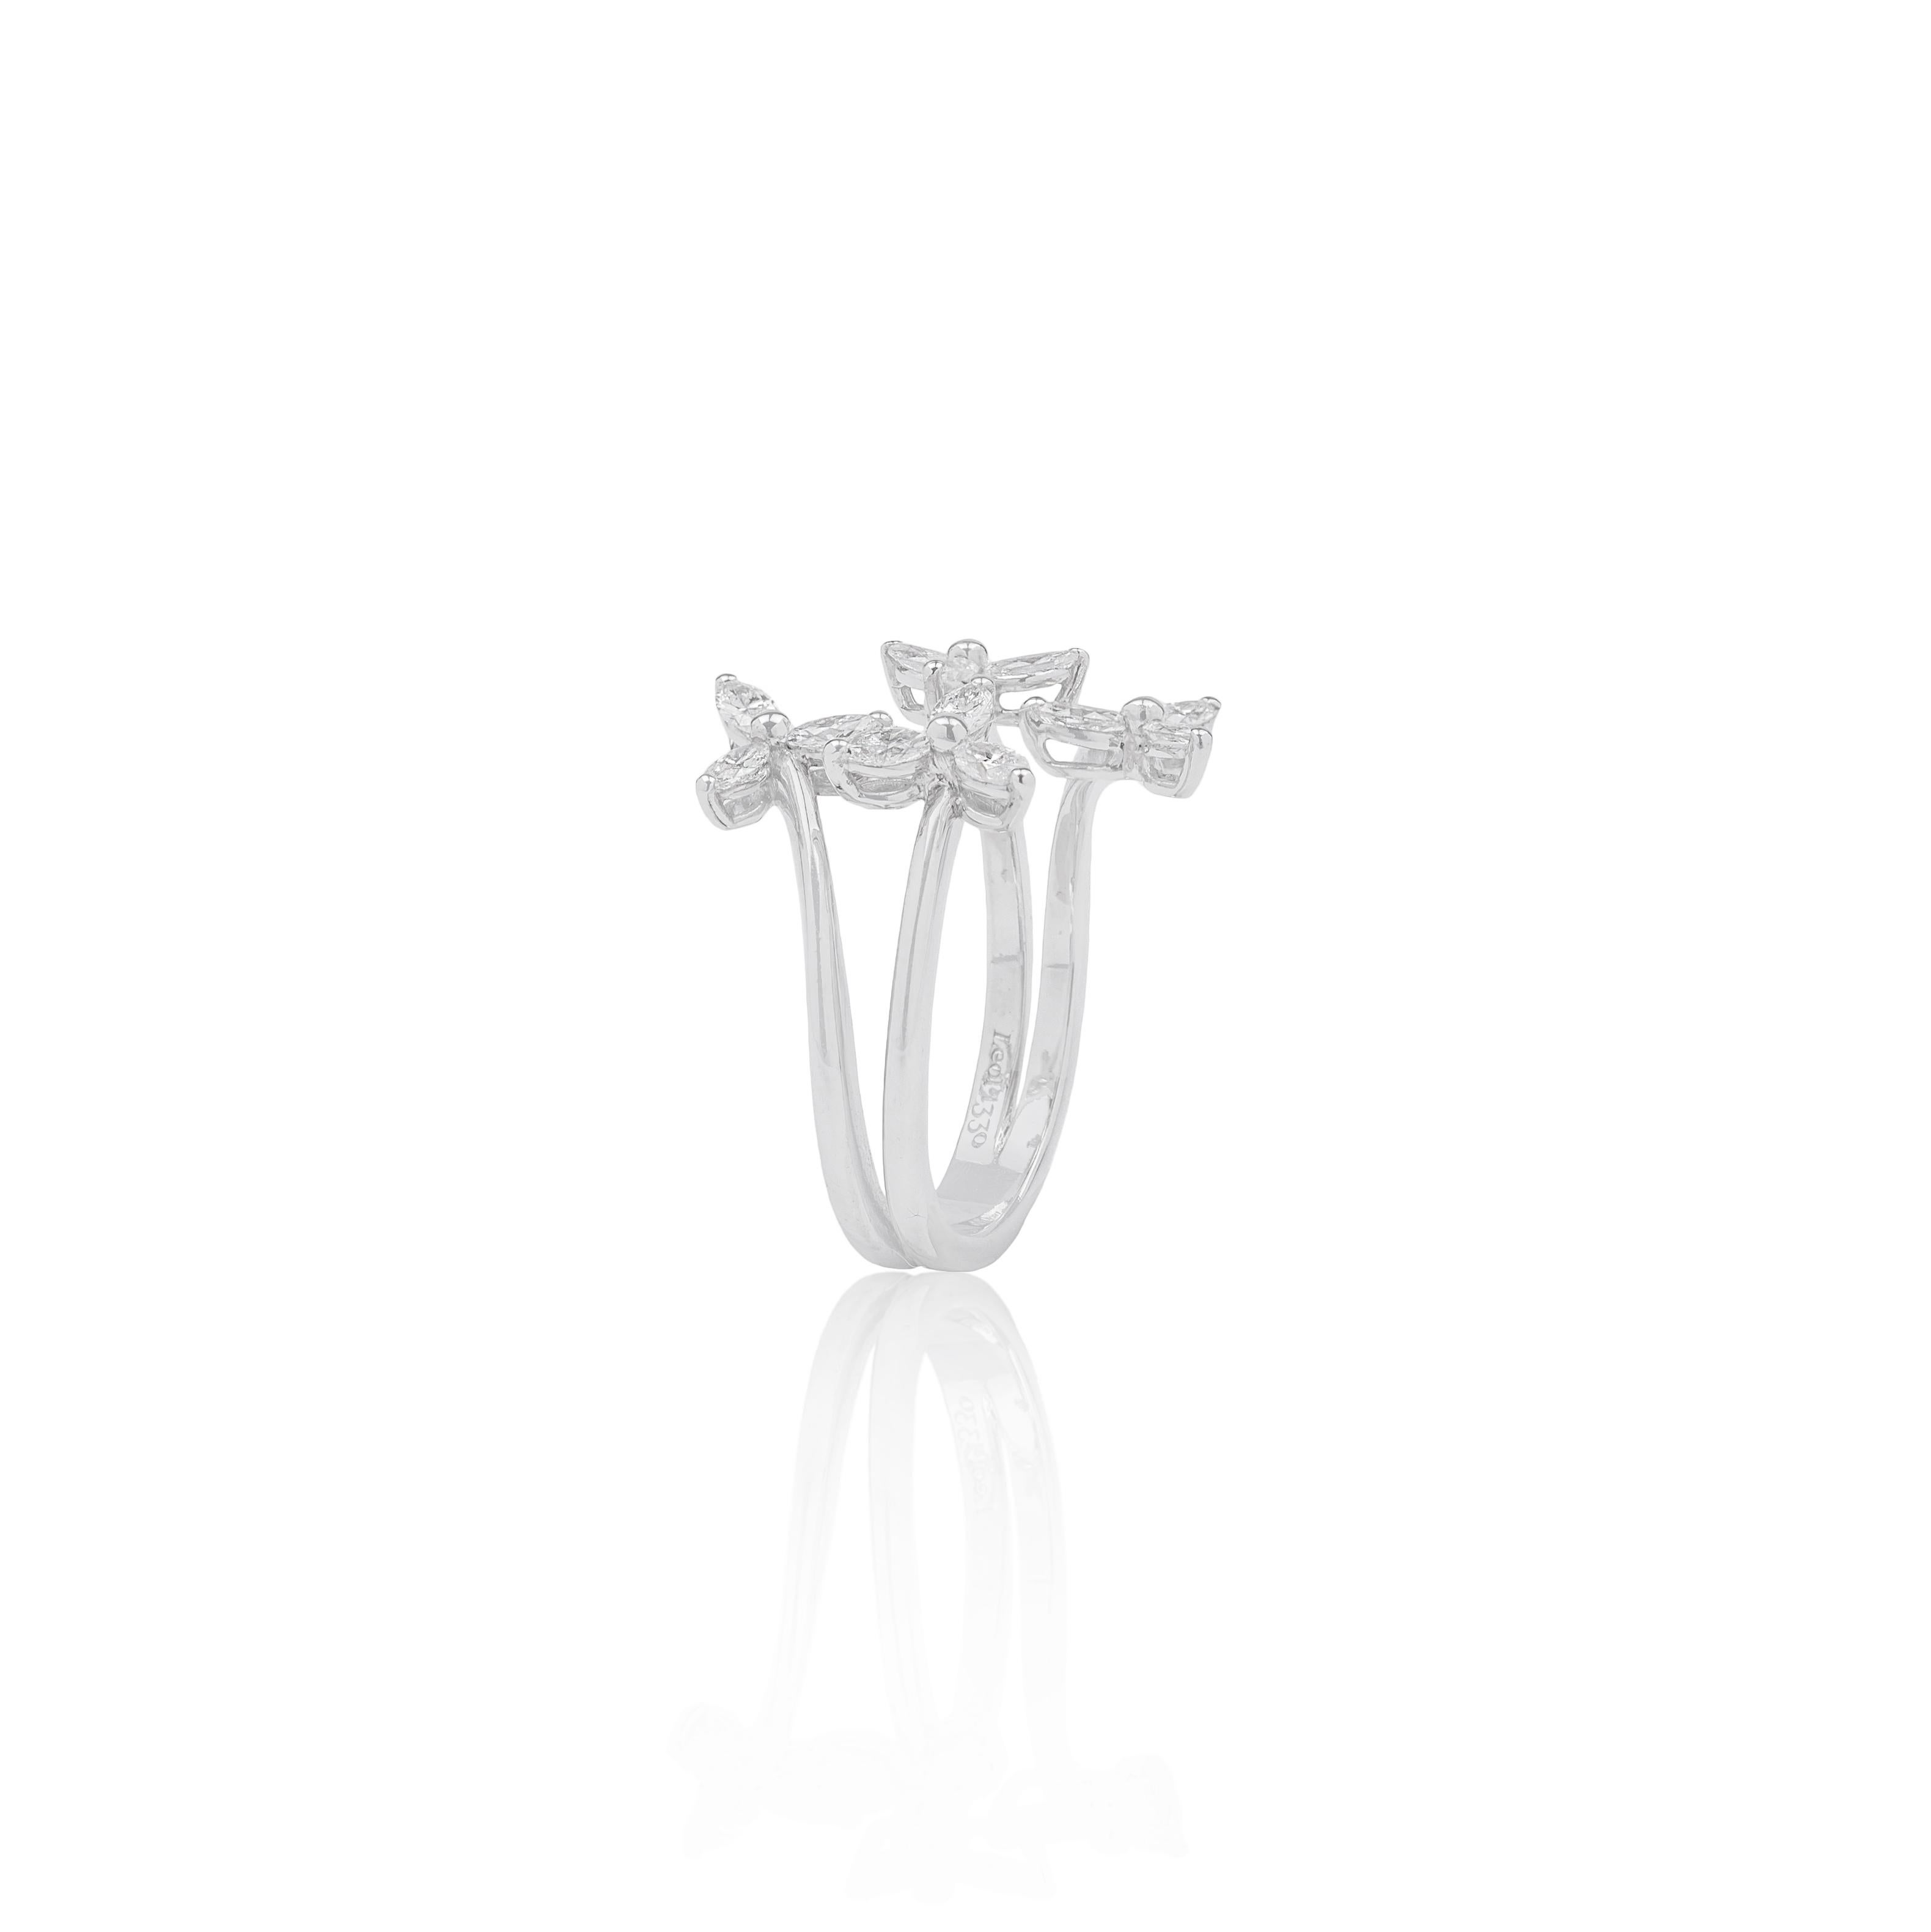 For Sale:  18k White Gold and Diamonds Clovers Ring 3